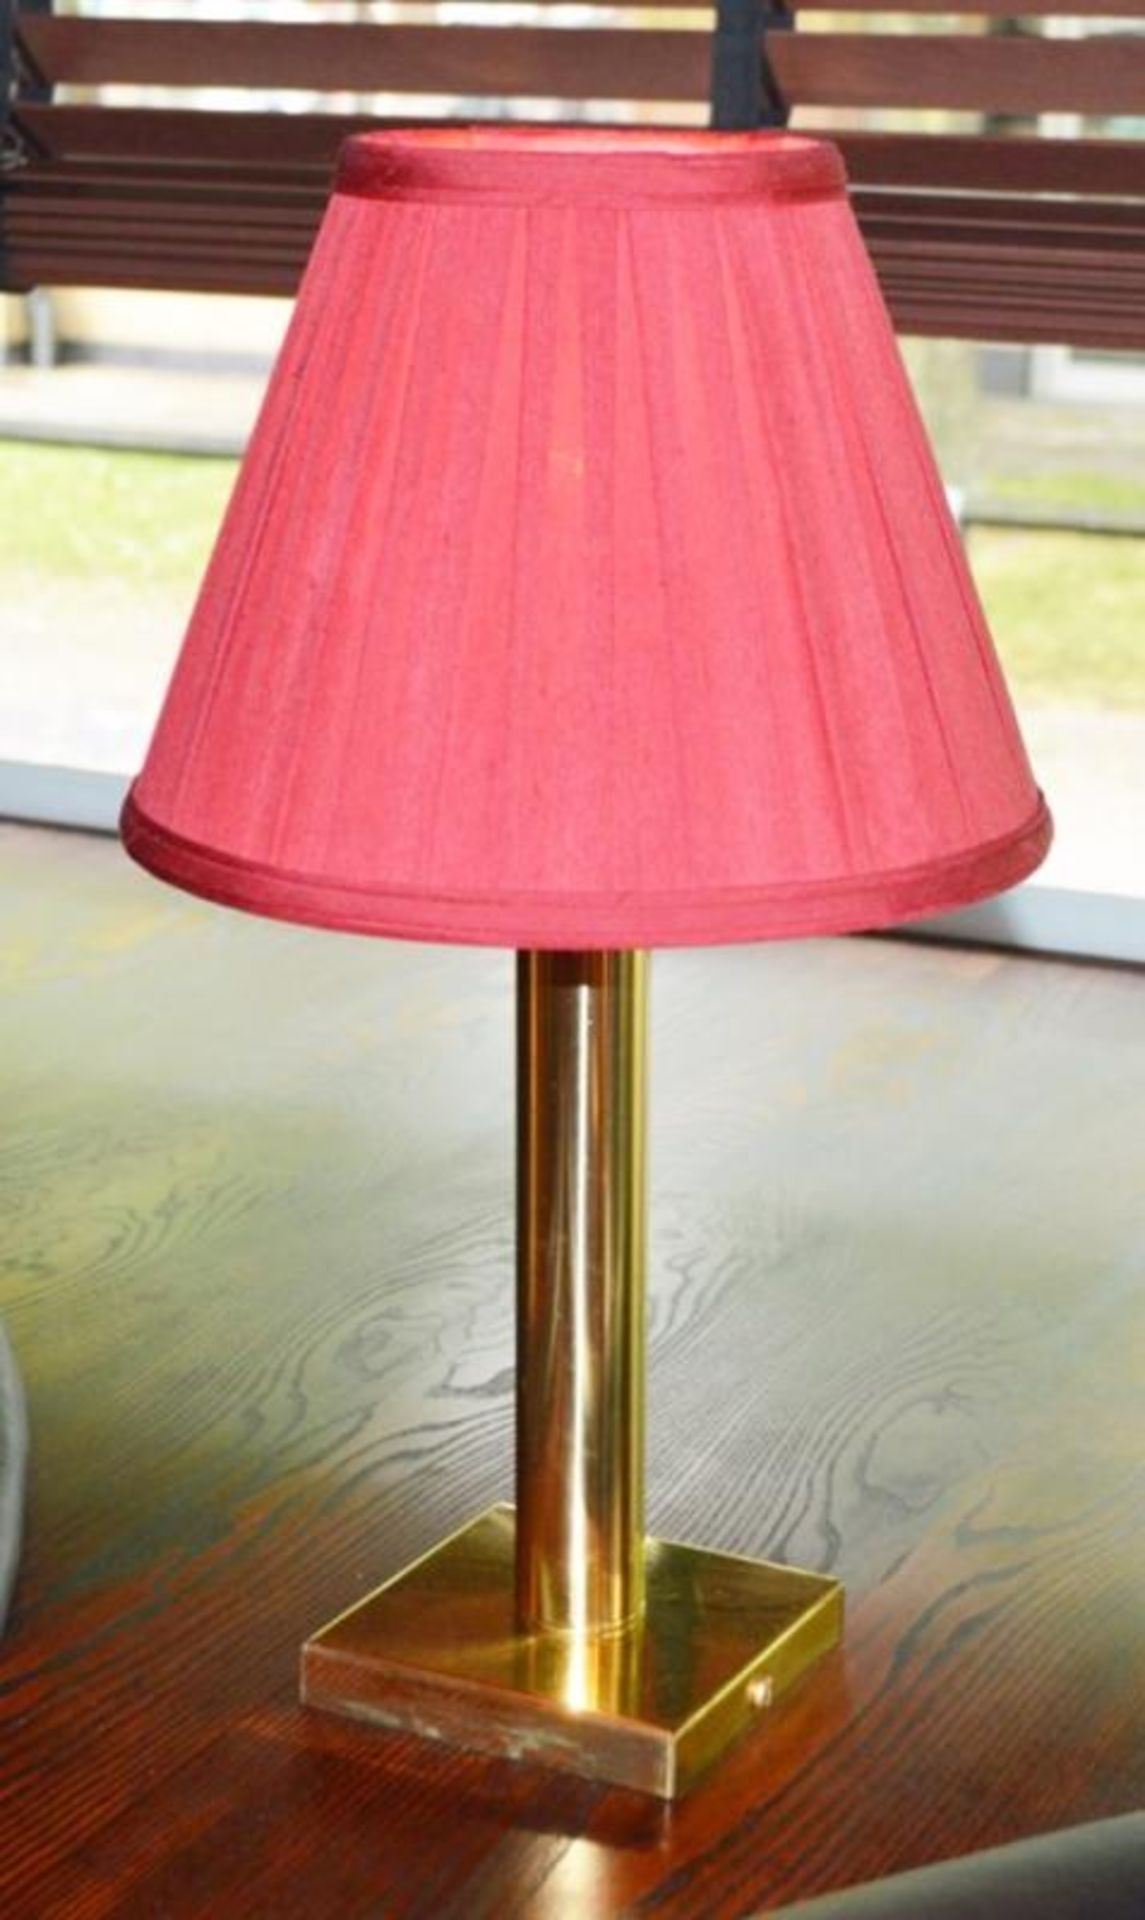 5 x Fixed Table Lamps With a Brass Finish and Red Shades -Total Height 46cms